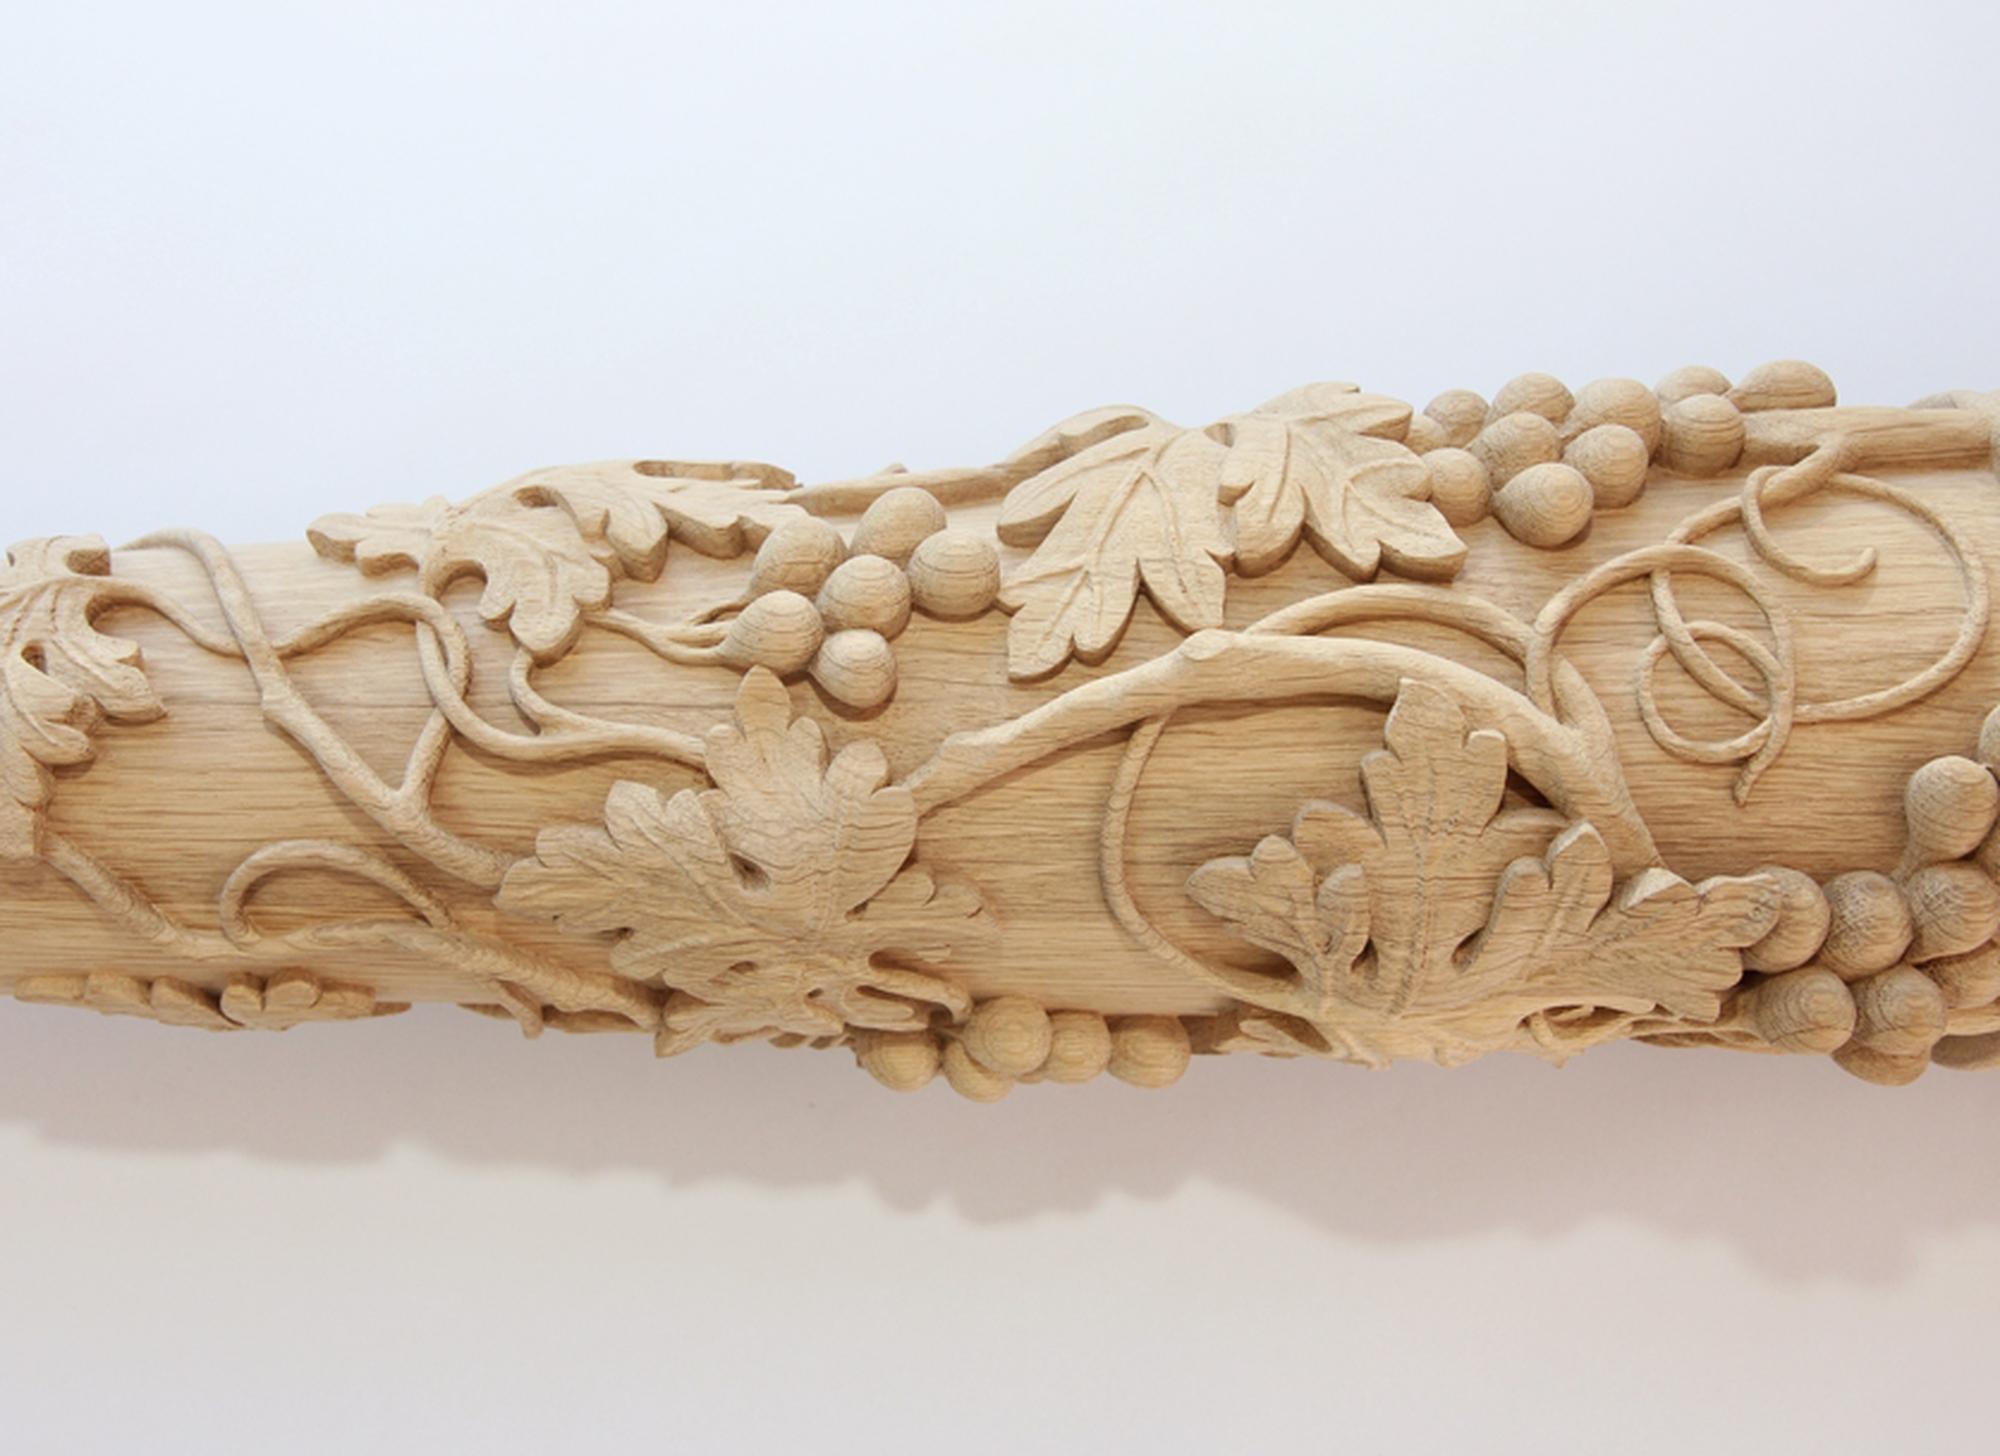 Unfinished High quality carved Newel Post from oak or beech of your choice.

>> SKU: L-061

>> Dimensions (A x B x d):

- 50.43